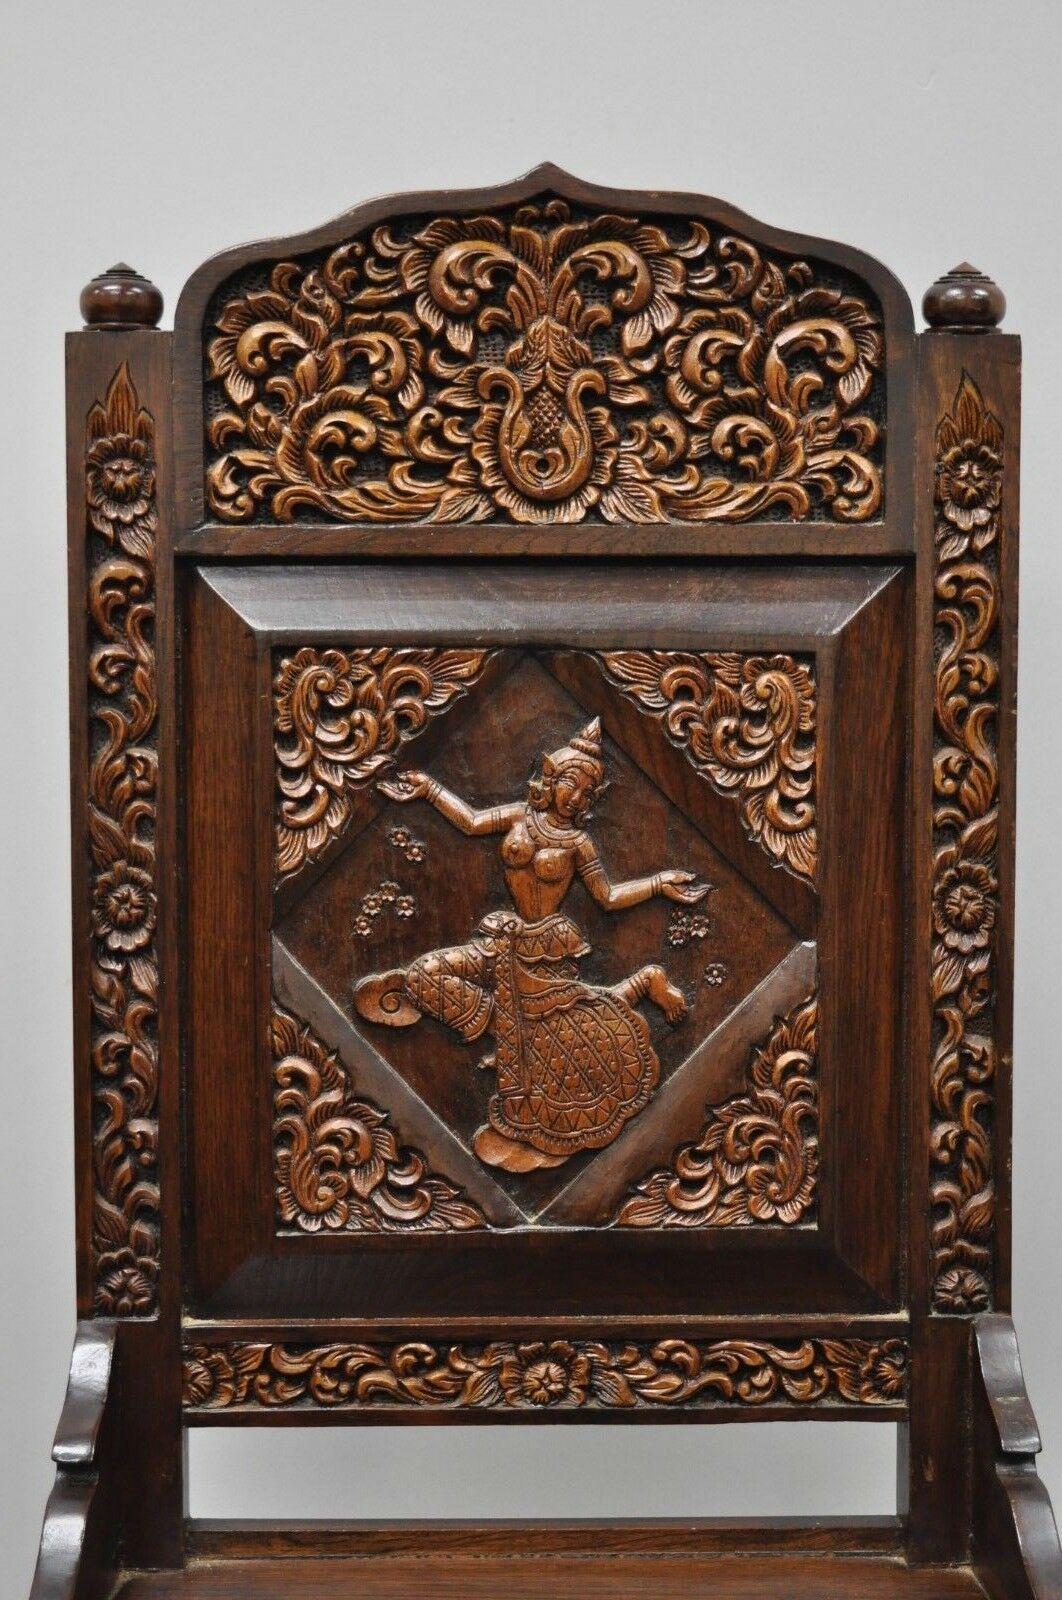 Other 6 Hand Carved Thai Oriental Teak Wood Dining Chairs with Dancing Female Figure